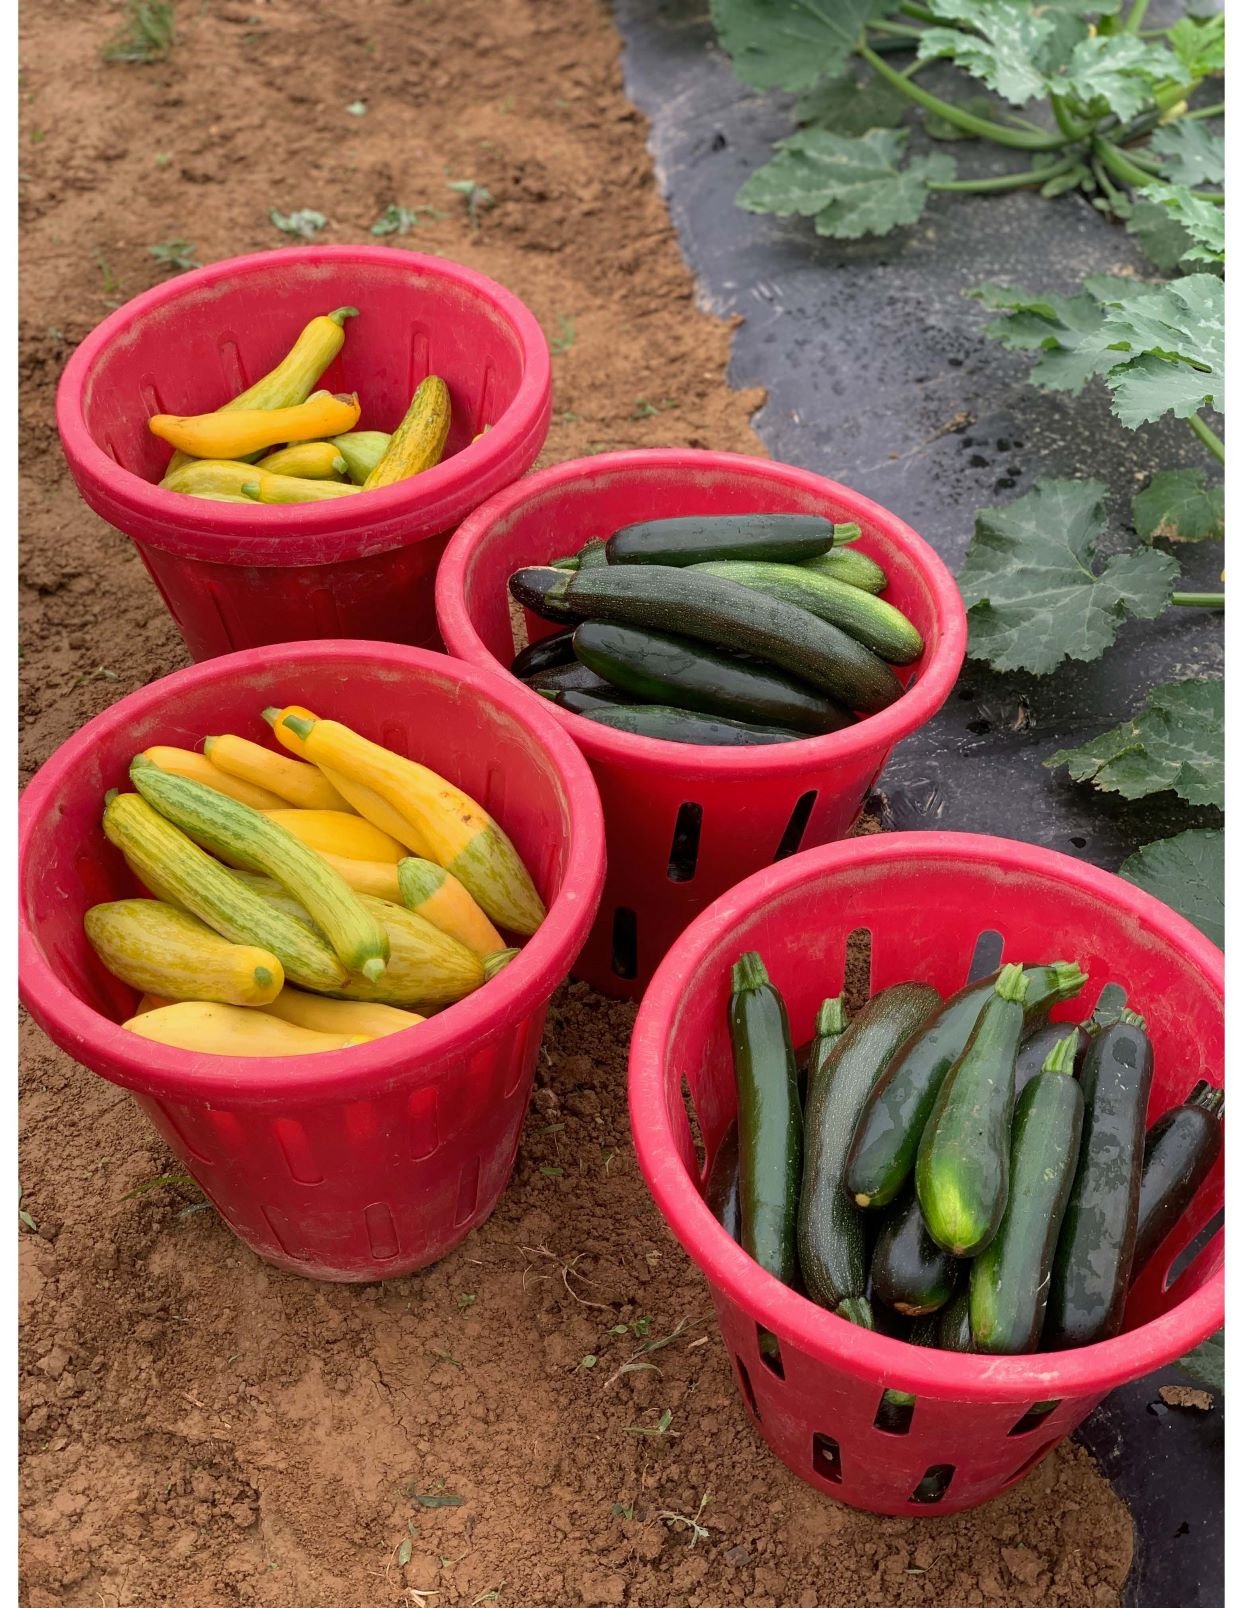 Friday CSA: Dickinson College Farm Field Notes for Week of June 24th